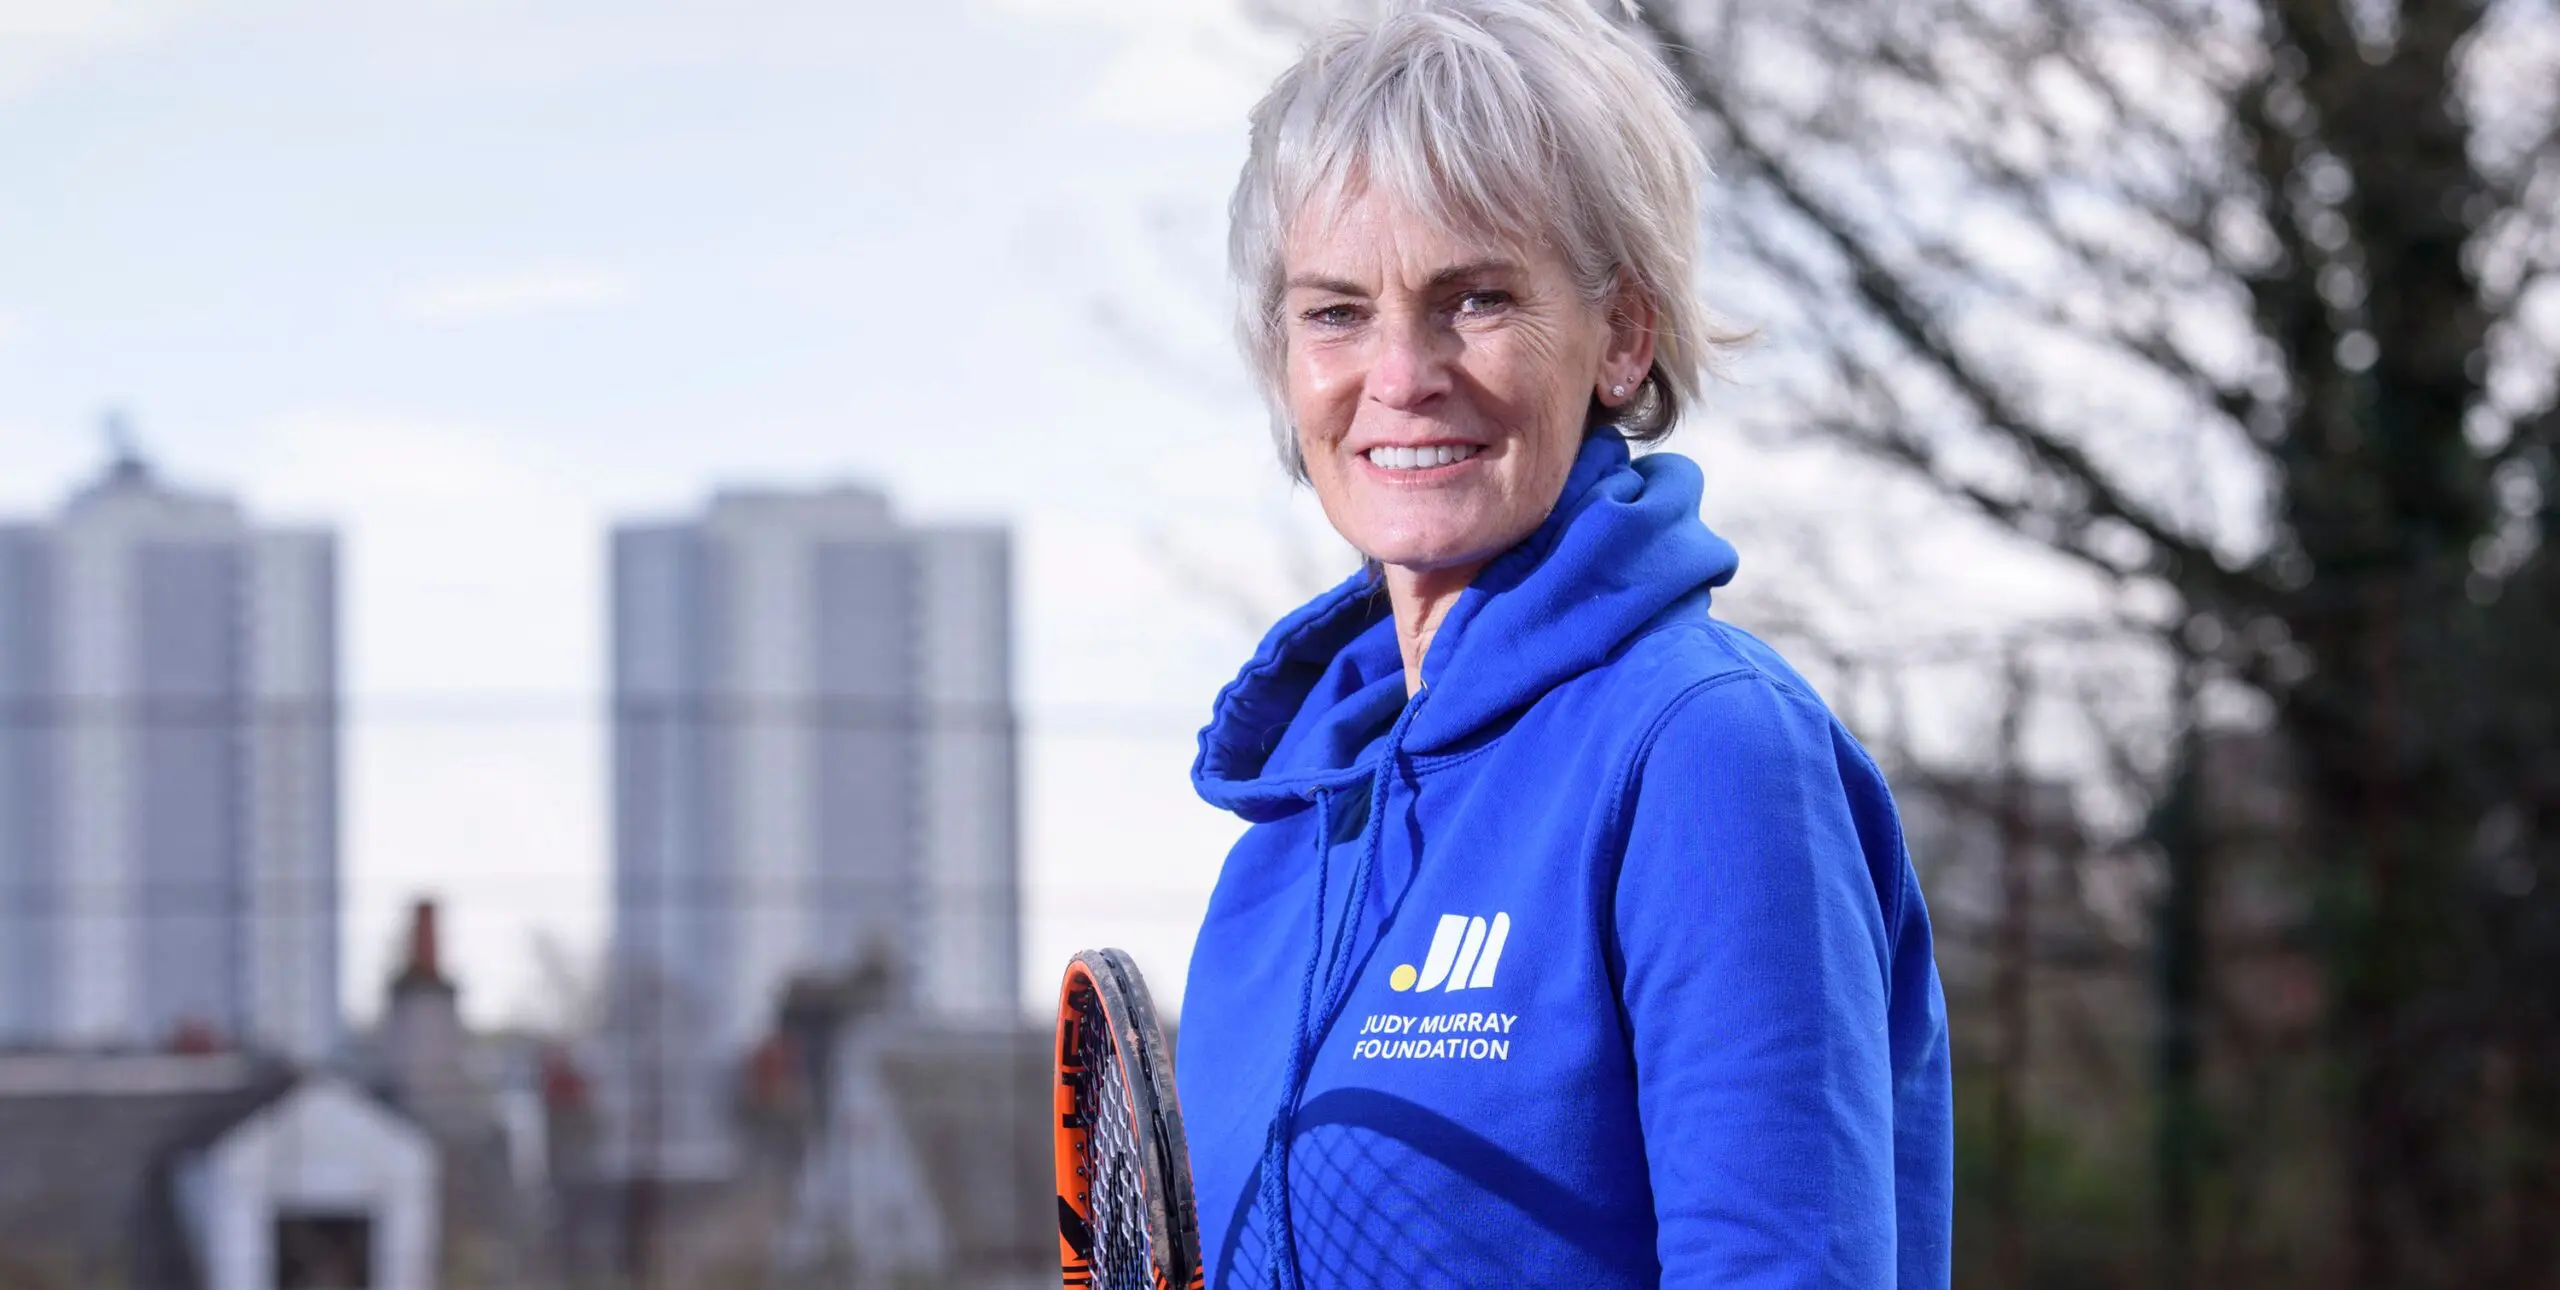 Judy murray interview scaled